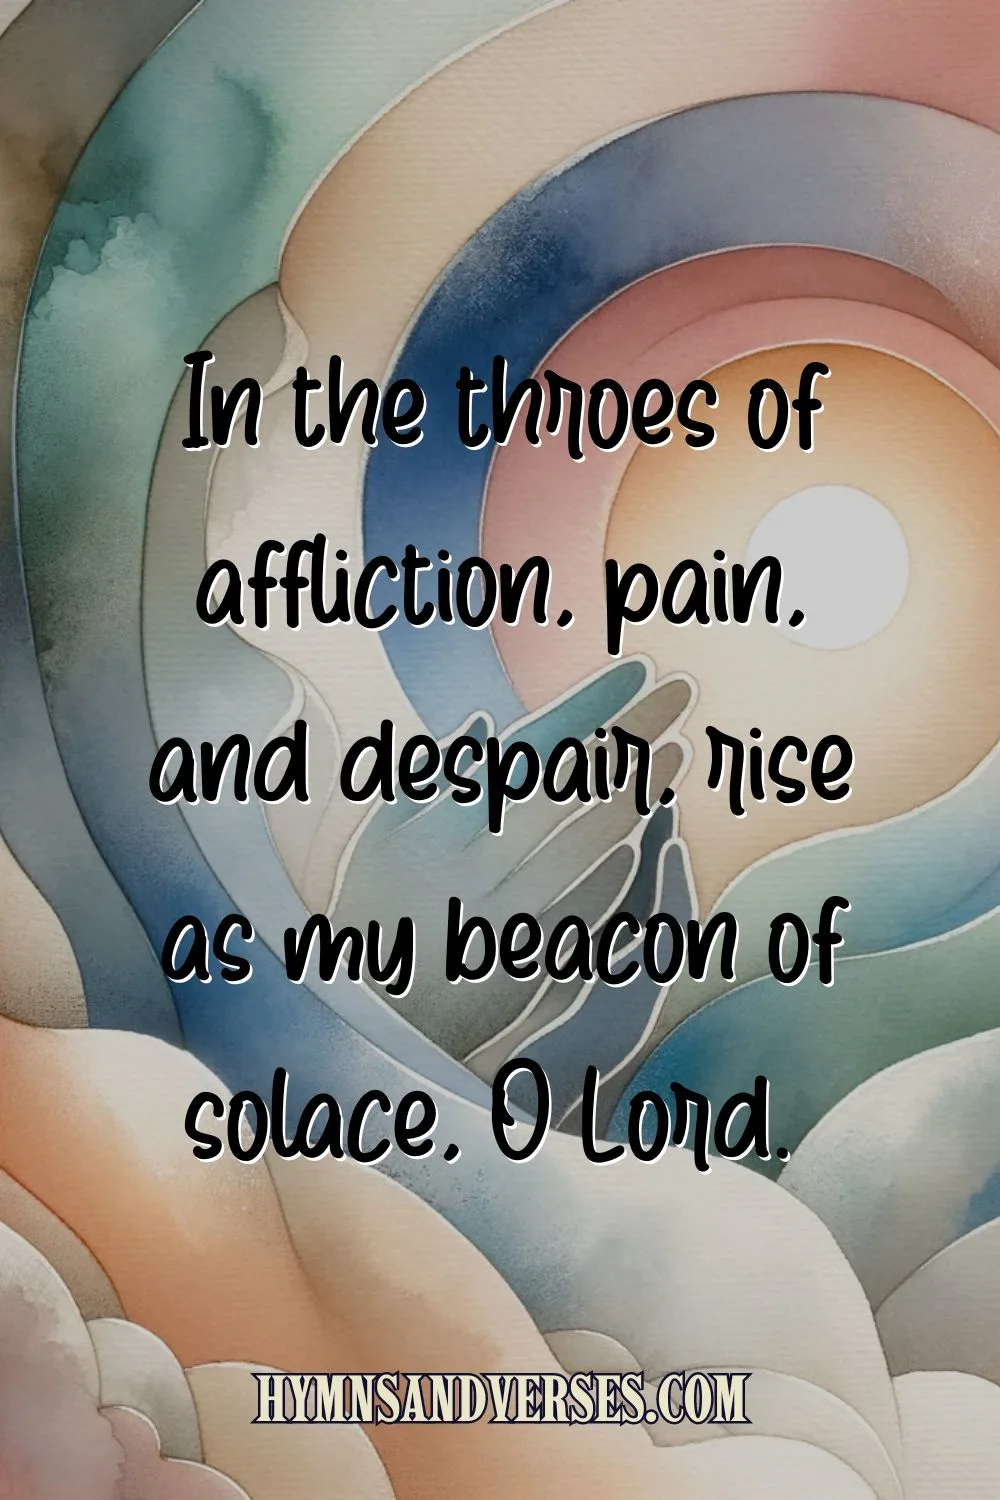 quote image for post, features text: In the throes of affliction, pain, and despair, rise as my beacon of solace, O Lord.